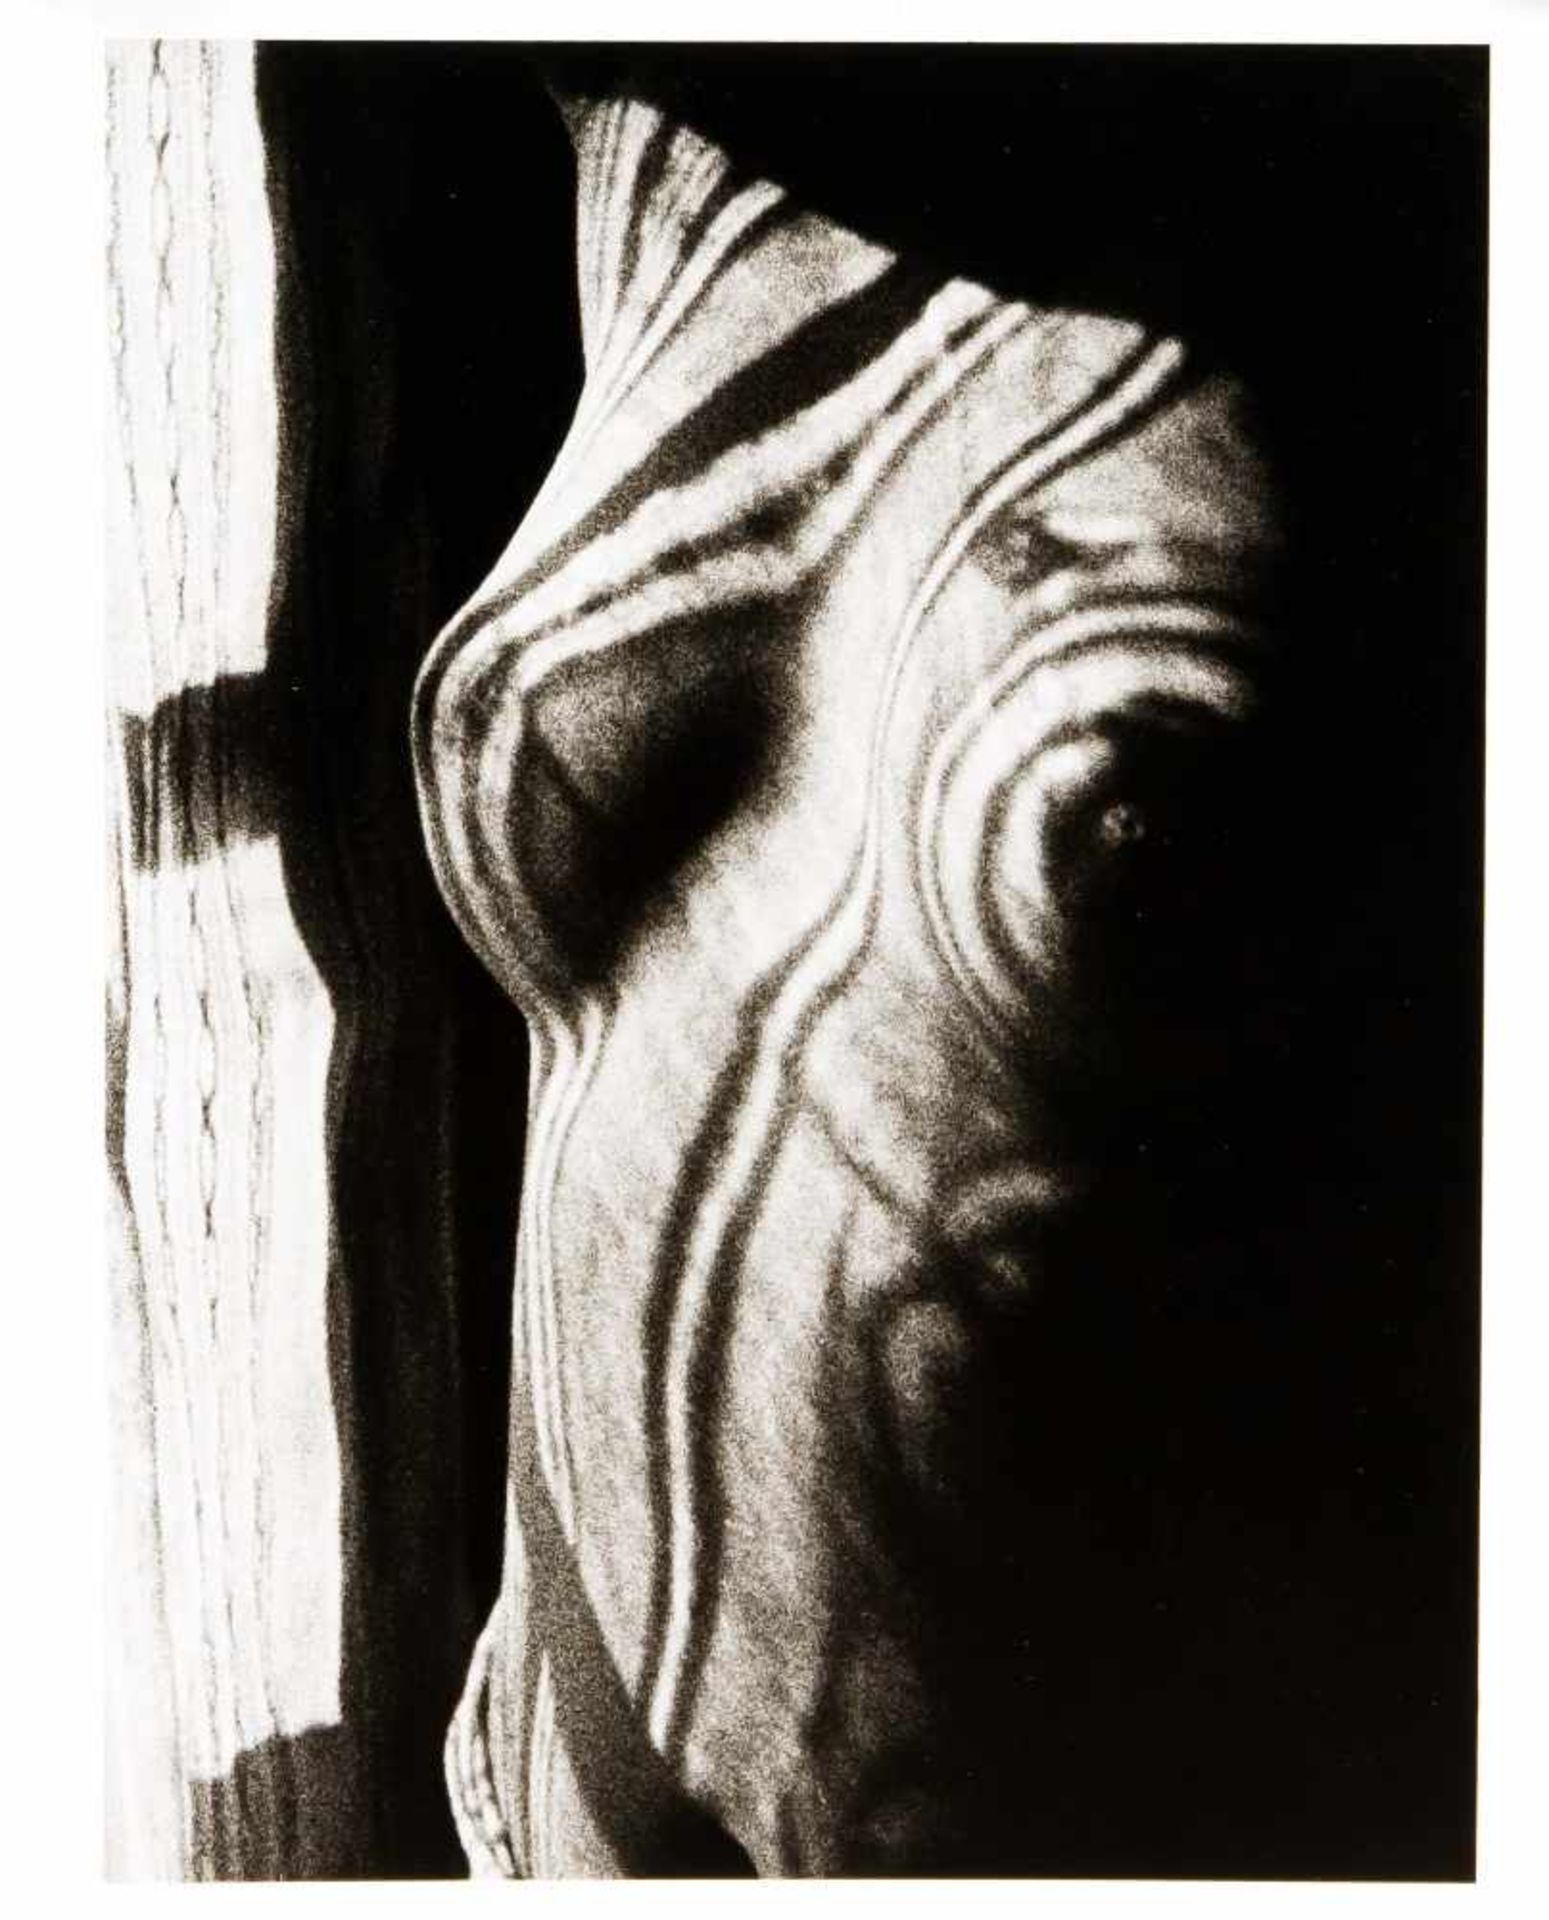 Man Ray (1890-1976), "Juliet", photograph, print for the stylus art 1991, stamped on the